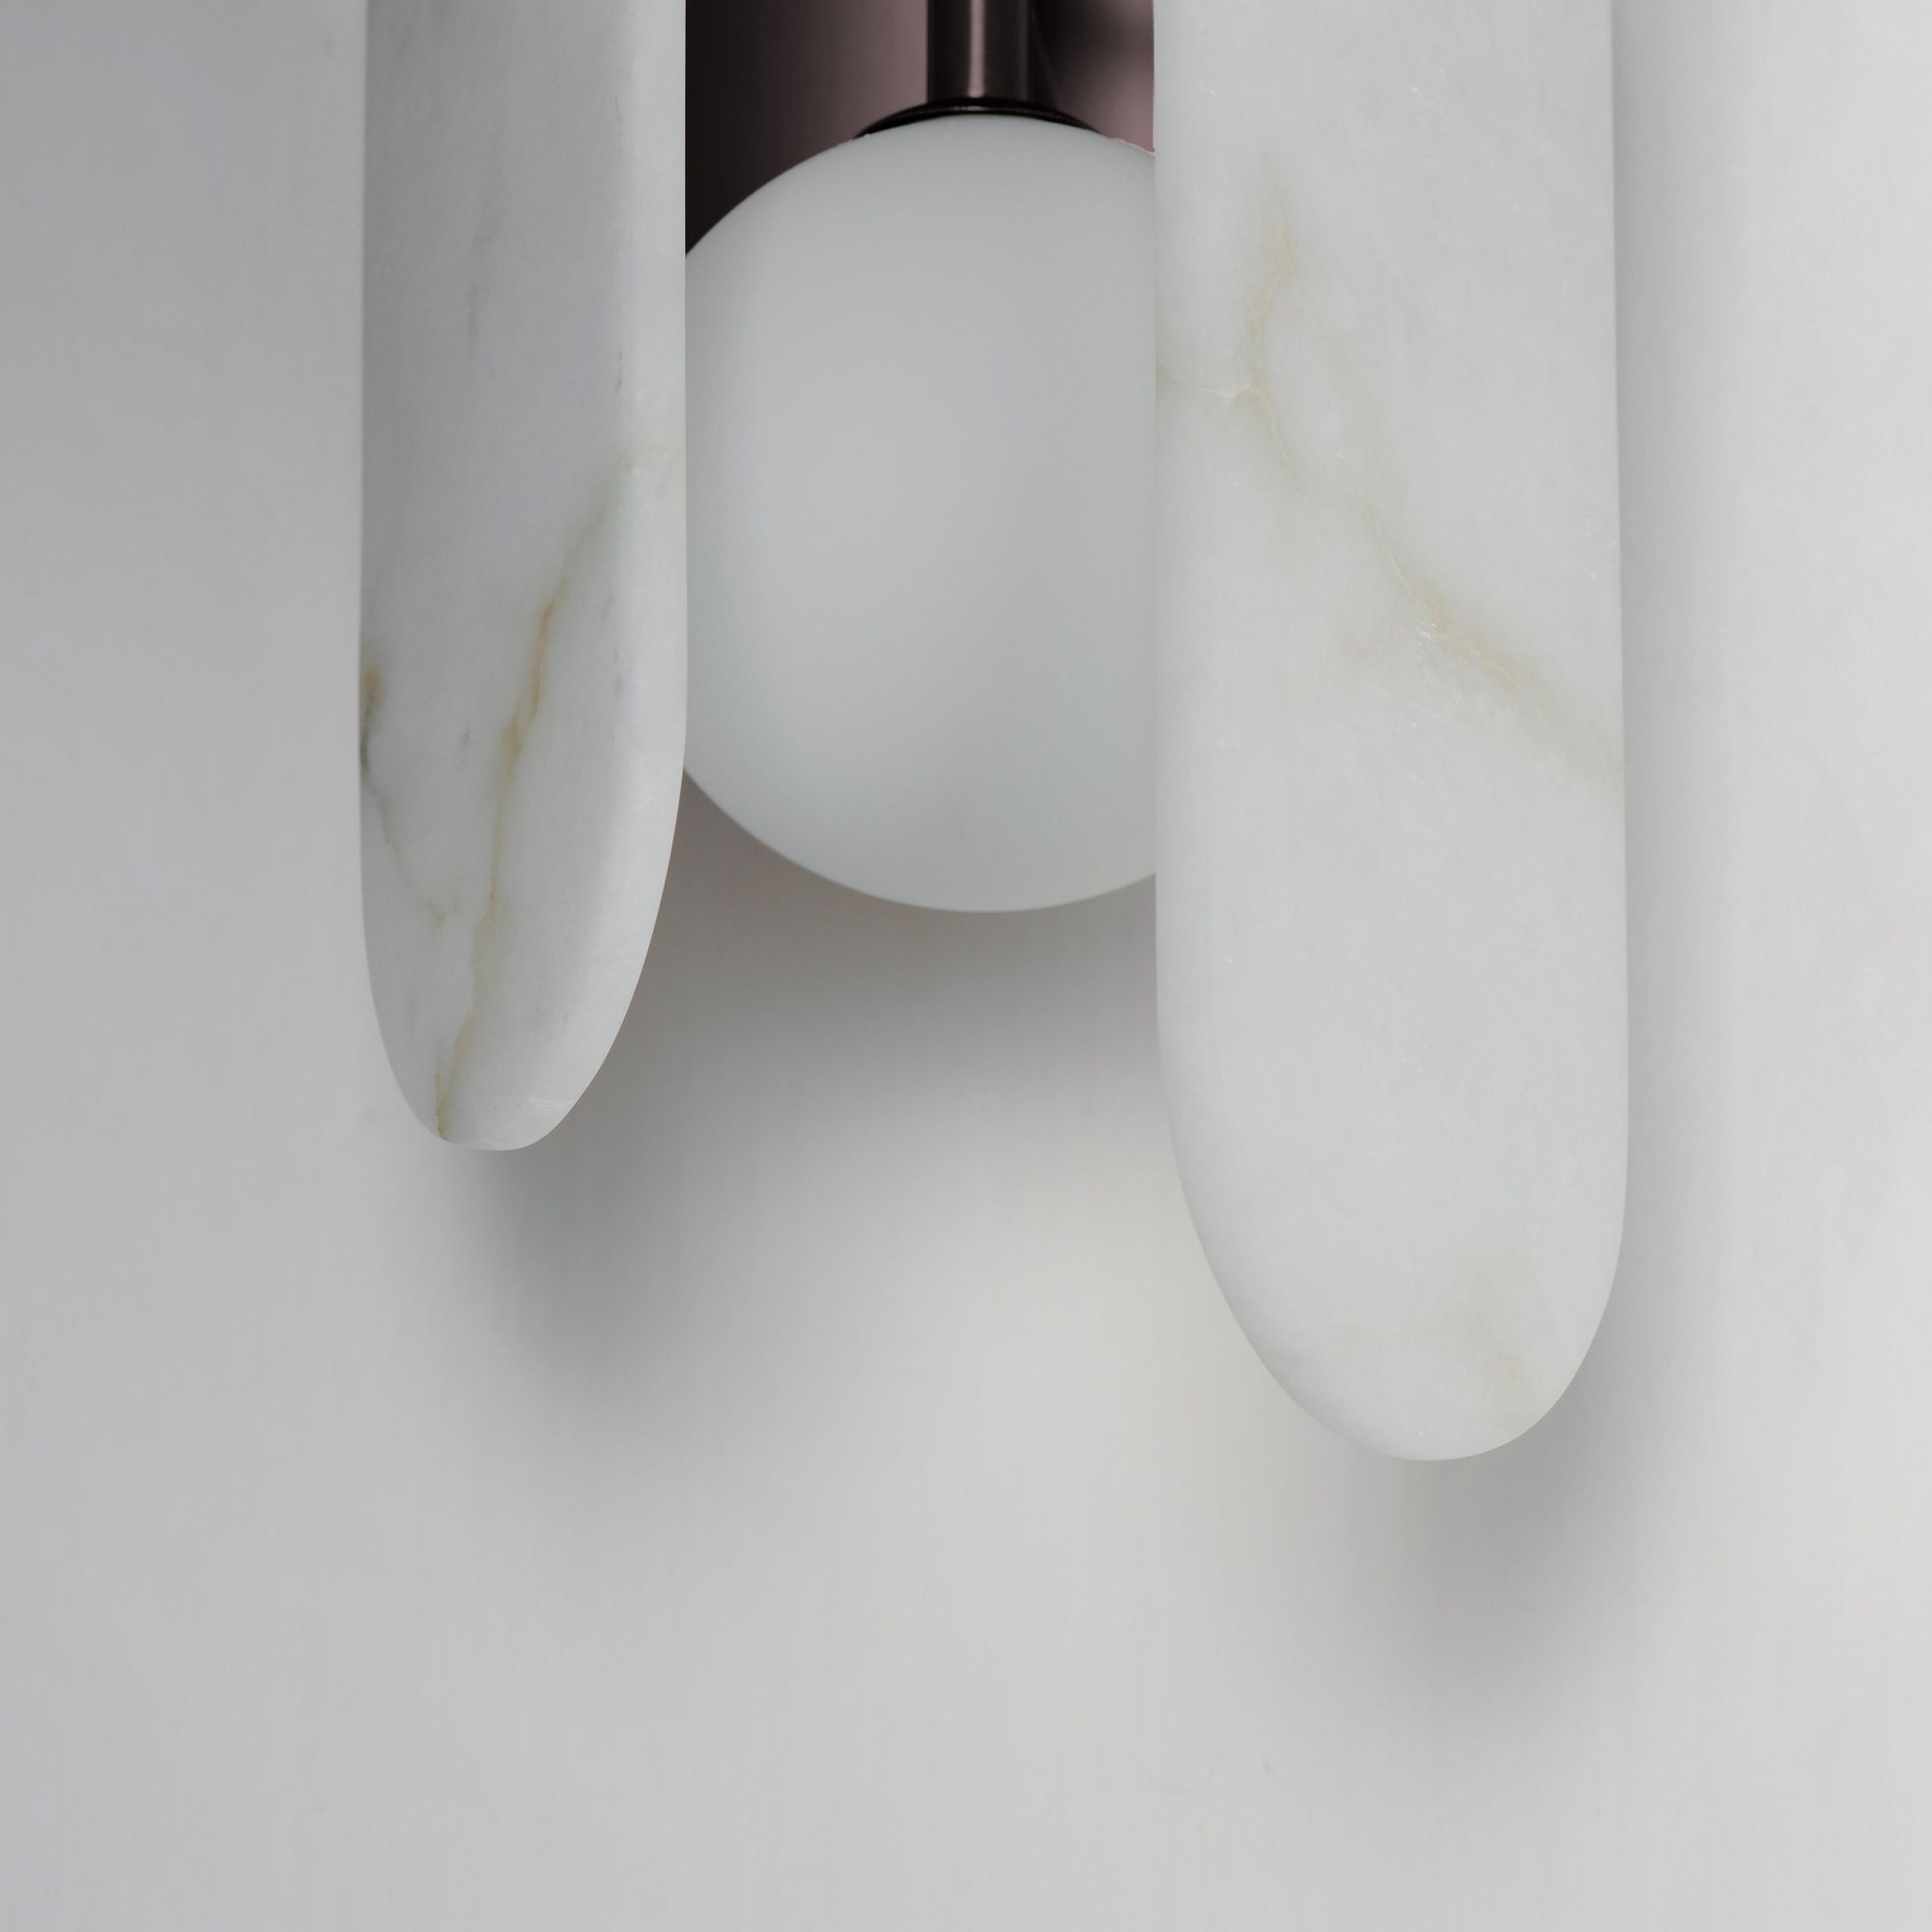 Studio M SM24810OXBBZ Megalith White Onyx Wall Sconce in Brushed Bronze by Nina Magon